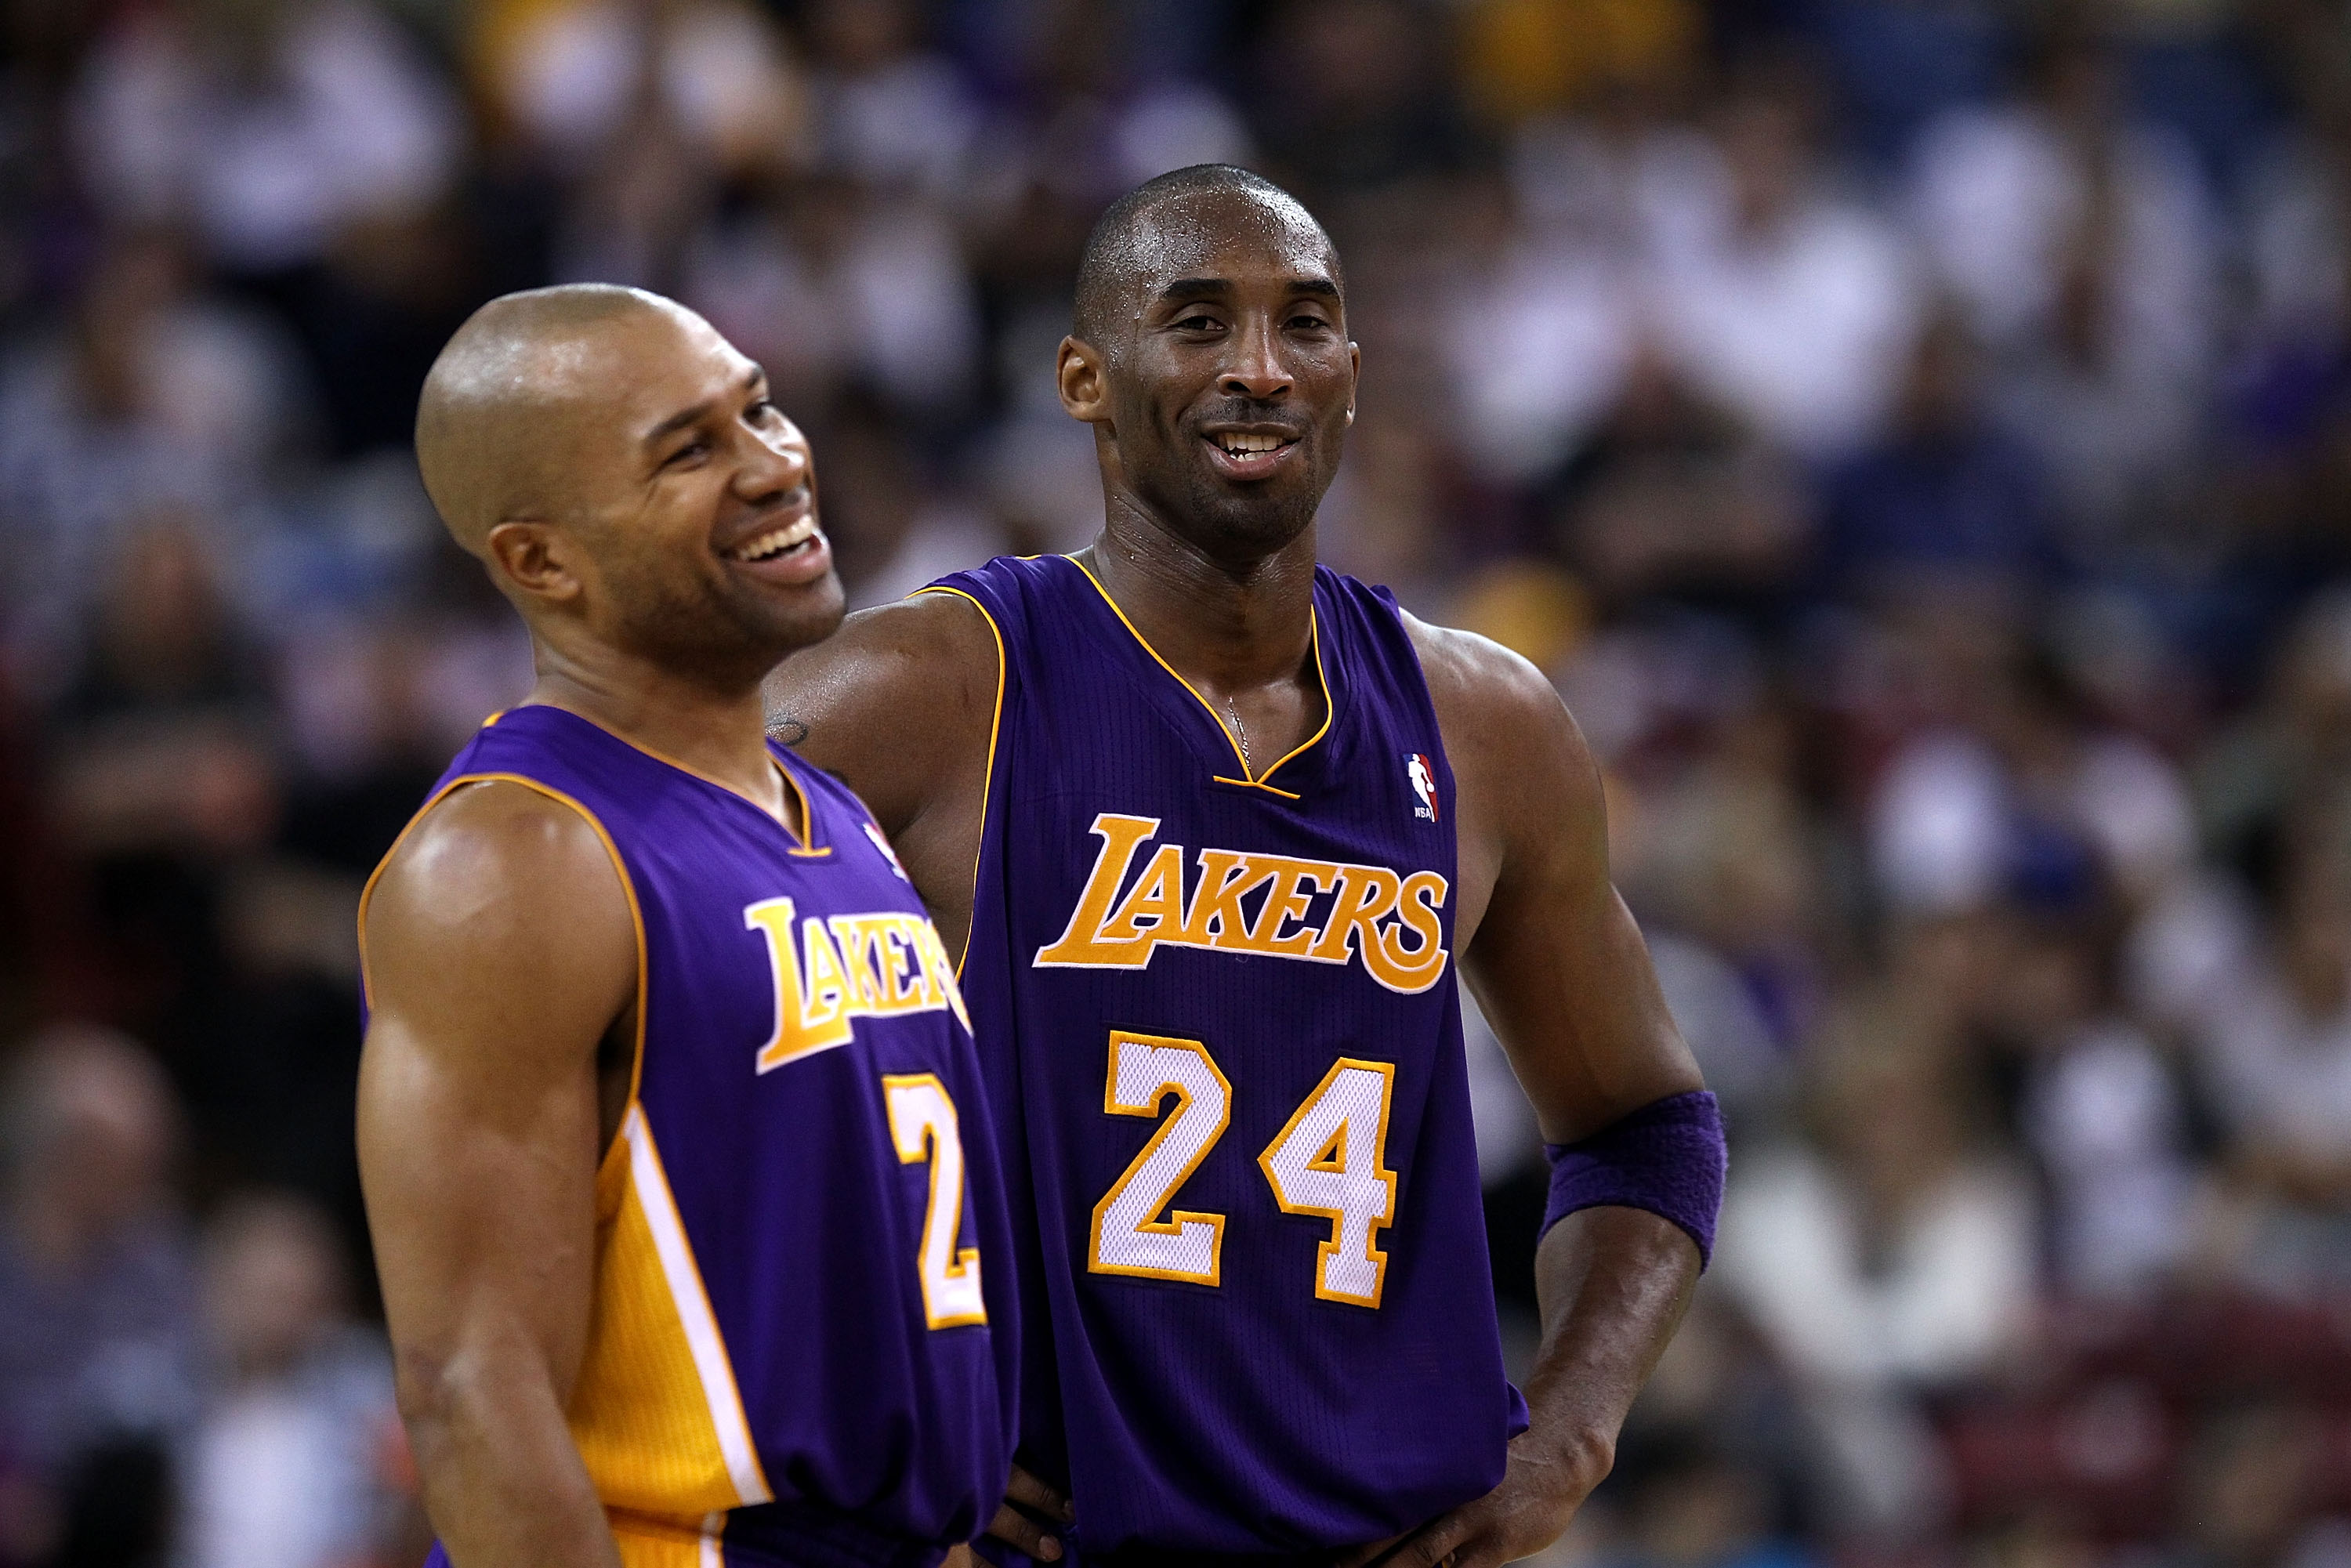 SACRAMENTO, CA - NOVEMBER 03:  Kobe Bryant #24 talks with Derek Fisher #2 of the Los Angeles Lakers during their game against the Sacramento Kings at ARCO Arena on November 3, 2010 in Sacramento, California.  NOTE TO USER: User expressly acknowledges and